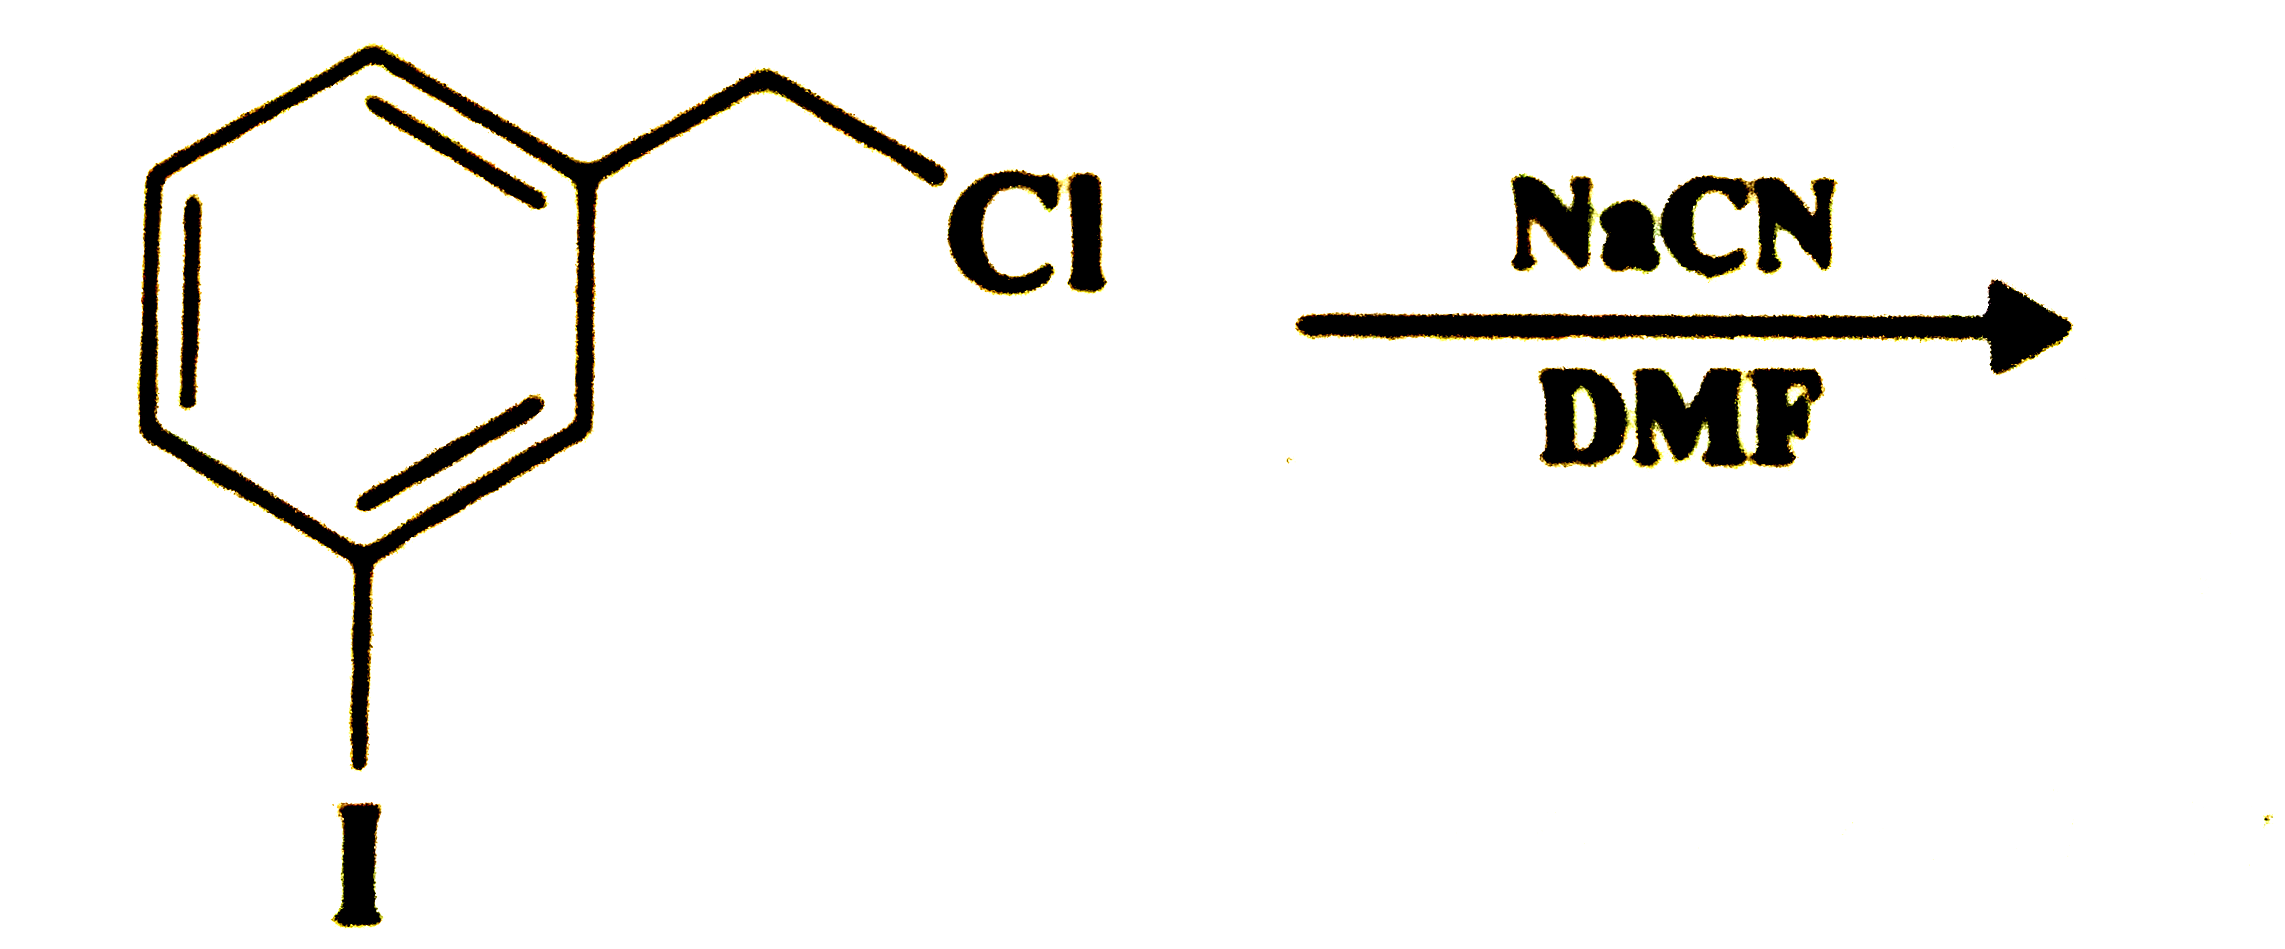 The structure of the major product formed in the following reaction is